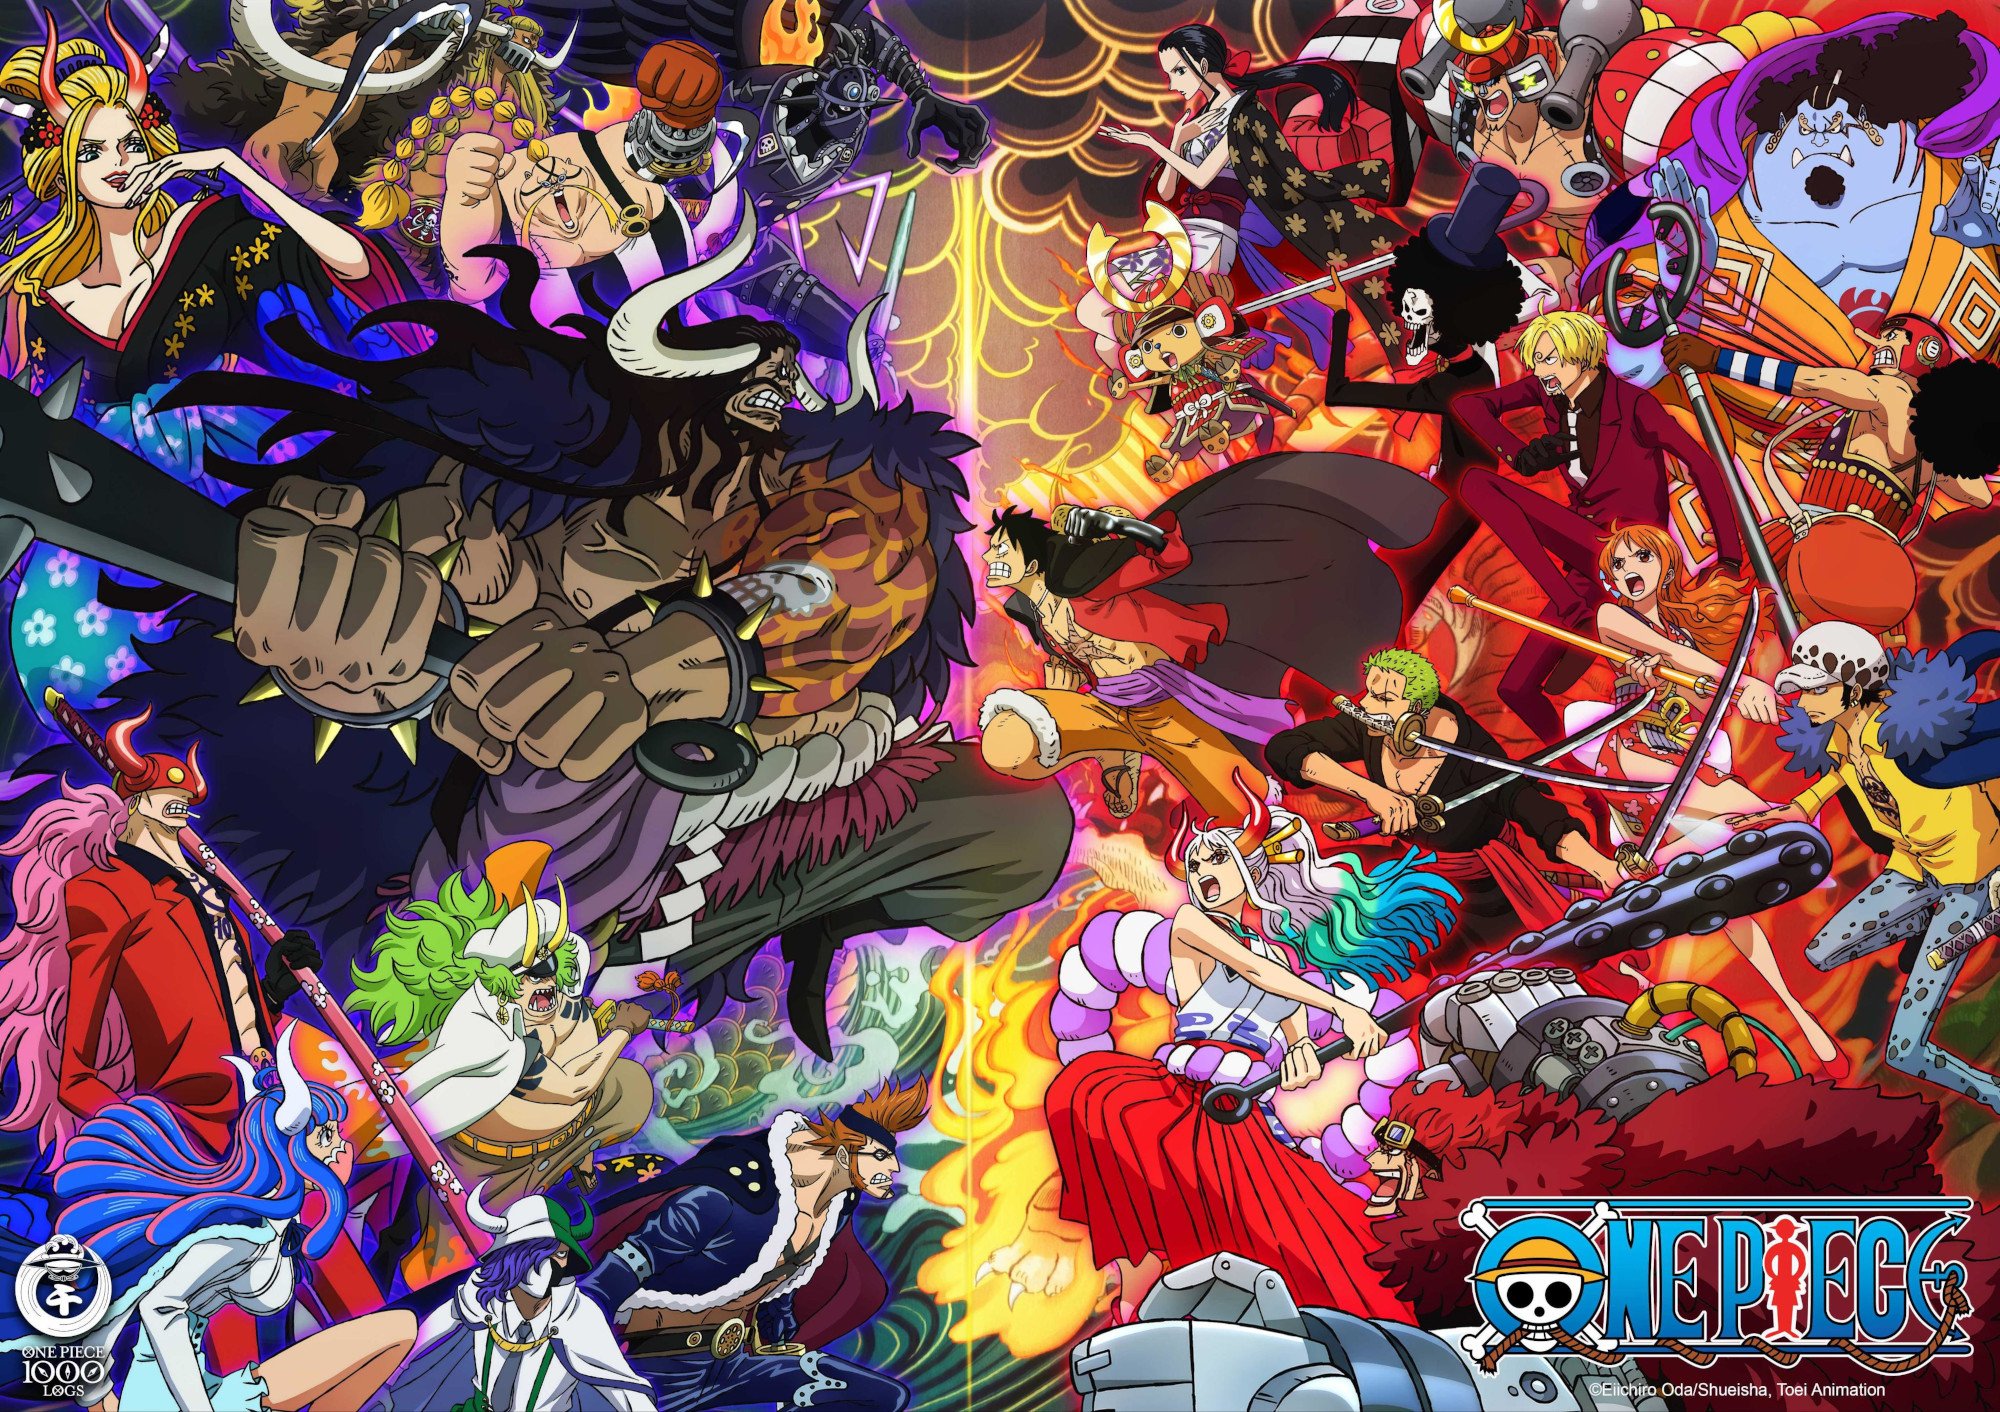 ‘One Piece’: How the Manga Set a Guinness World Record